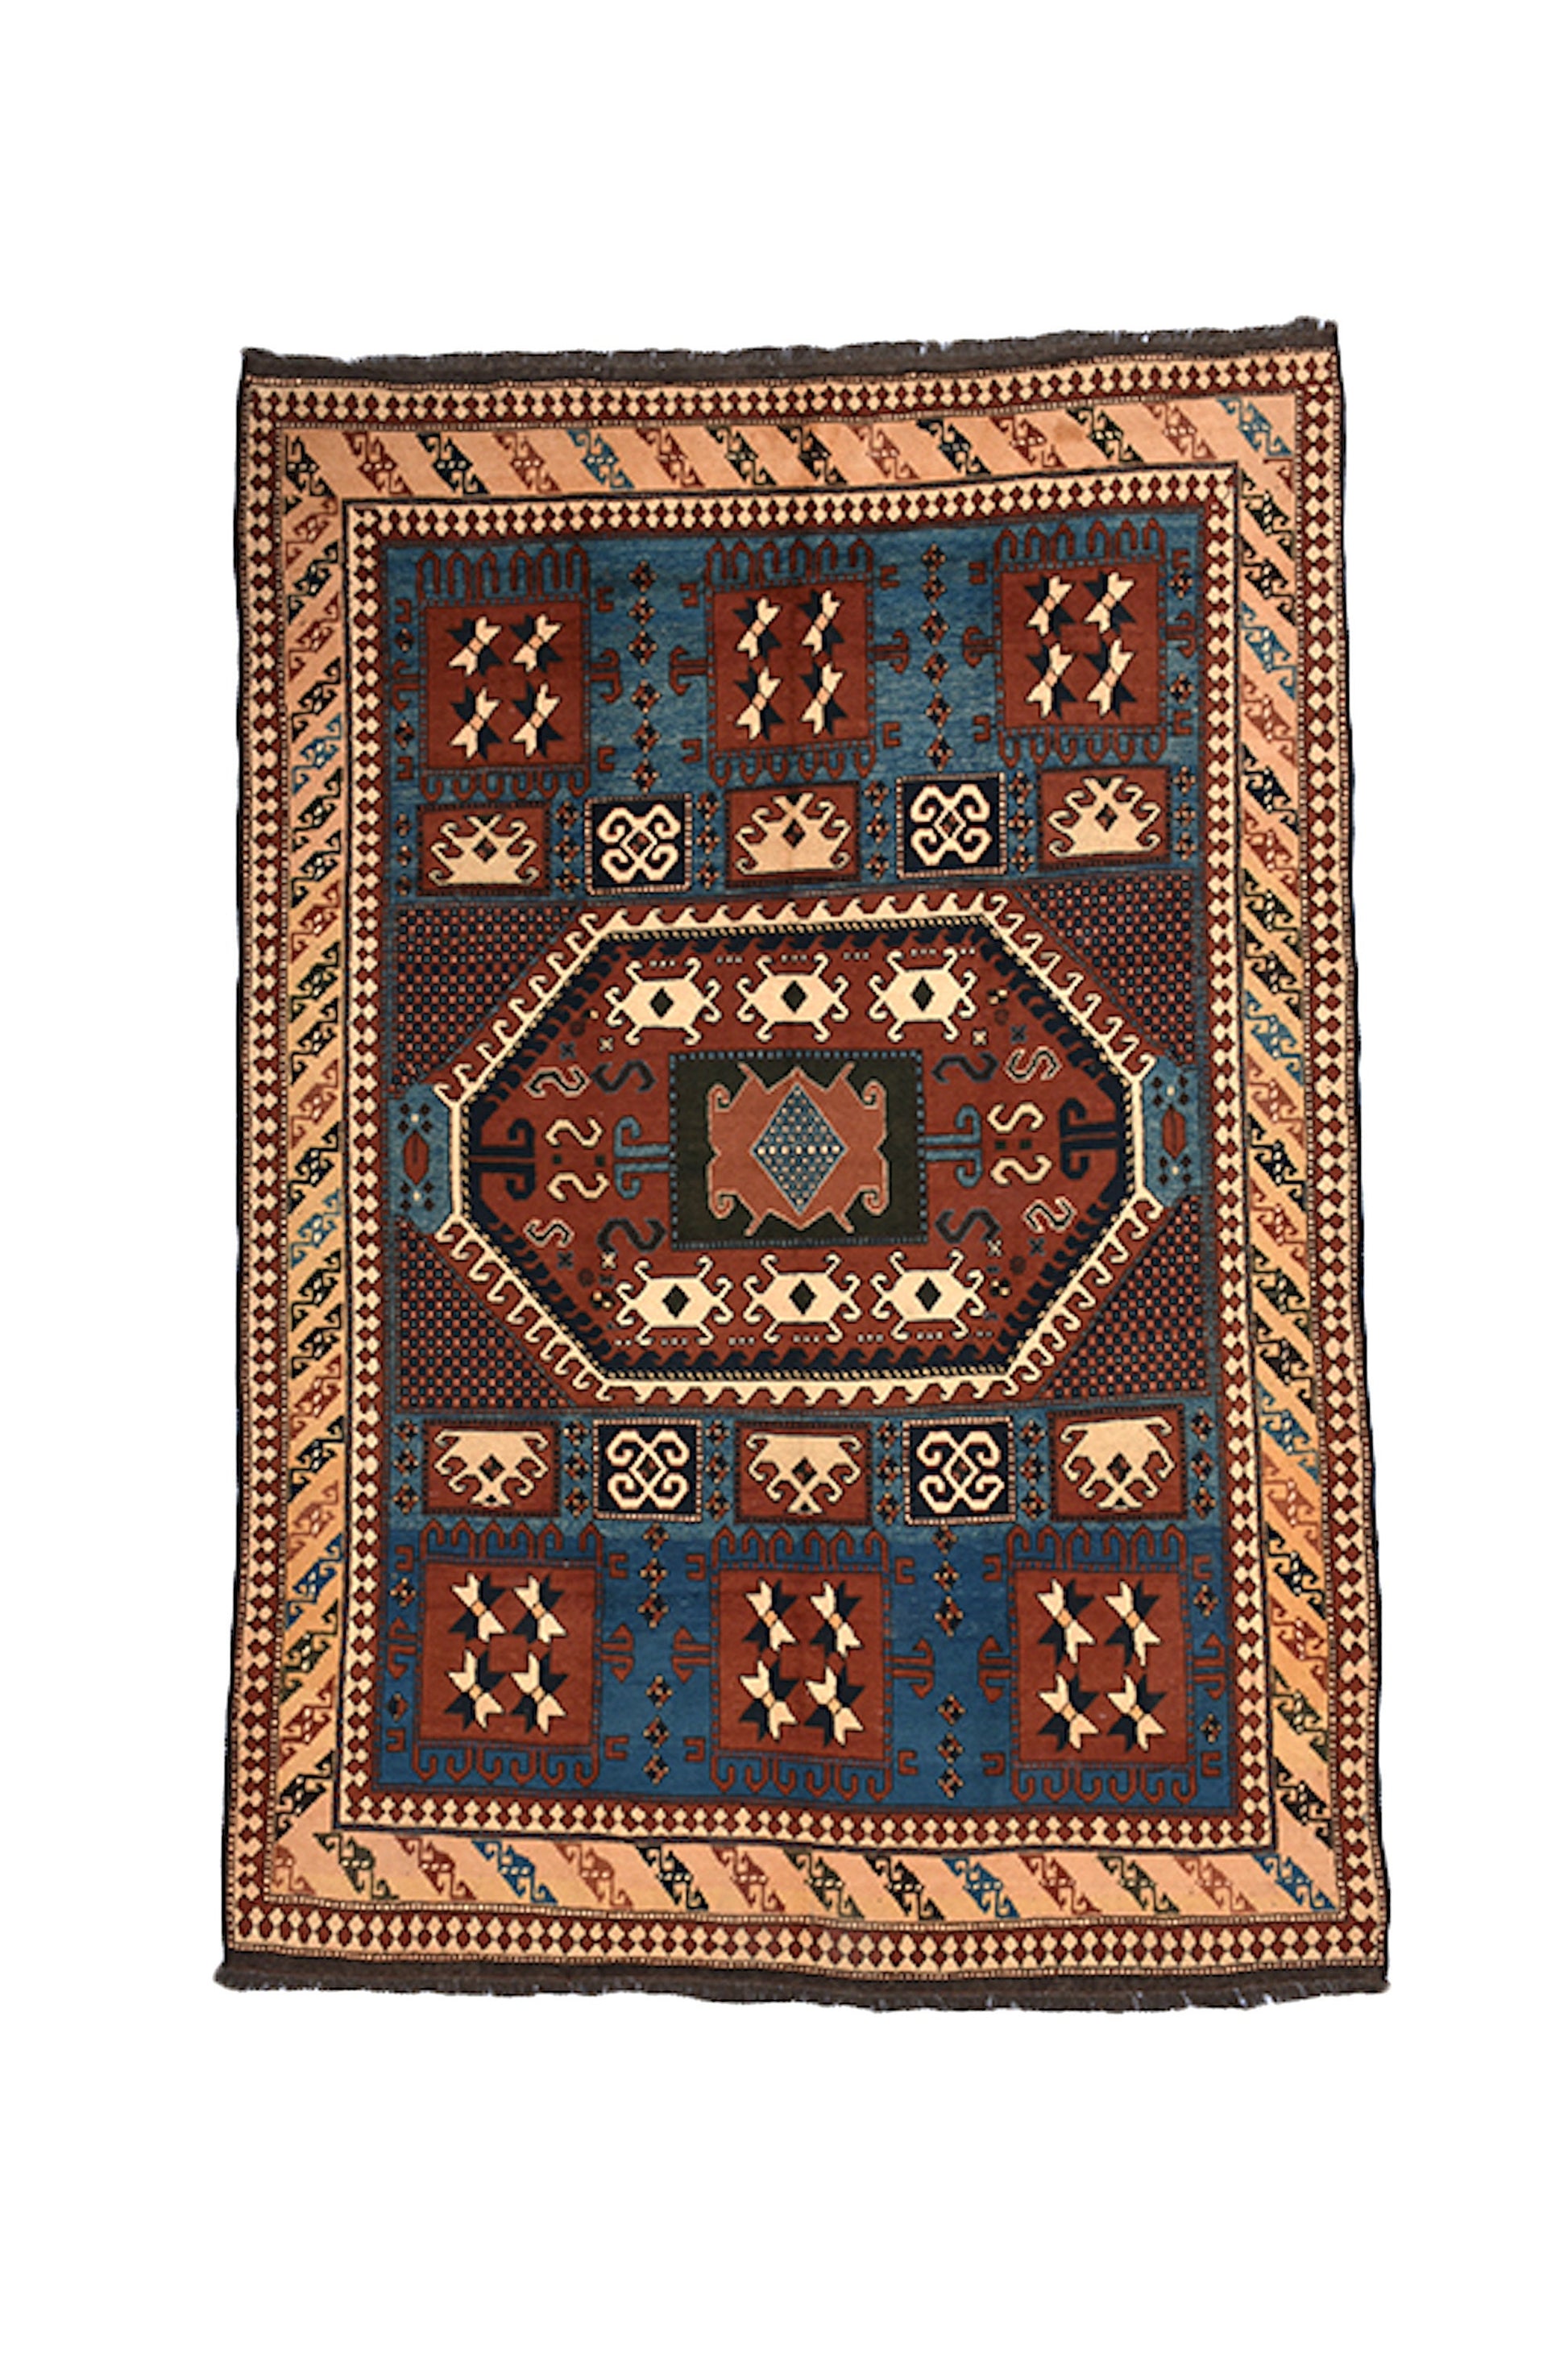 6 x 9 Brown Blue Rustic Area Rug | Handmade Tribal Rug with Teal Blue and Orange Pattern | Hand Woven Antique Rug